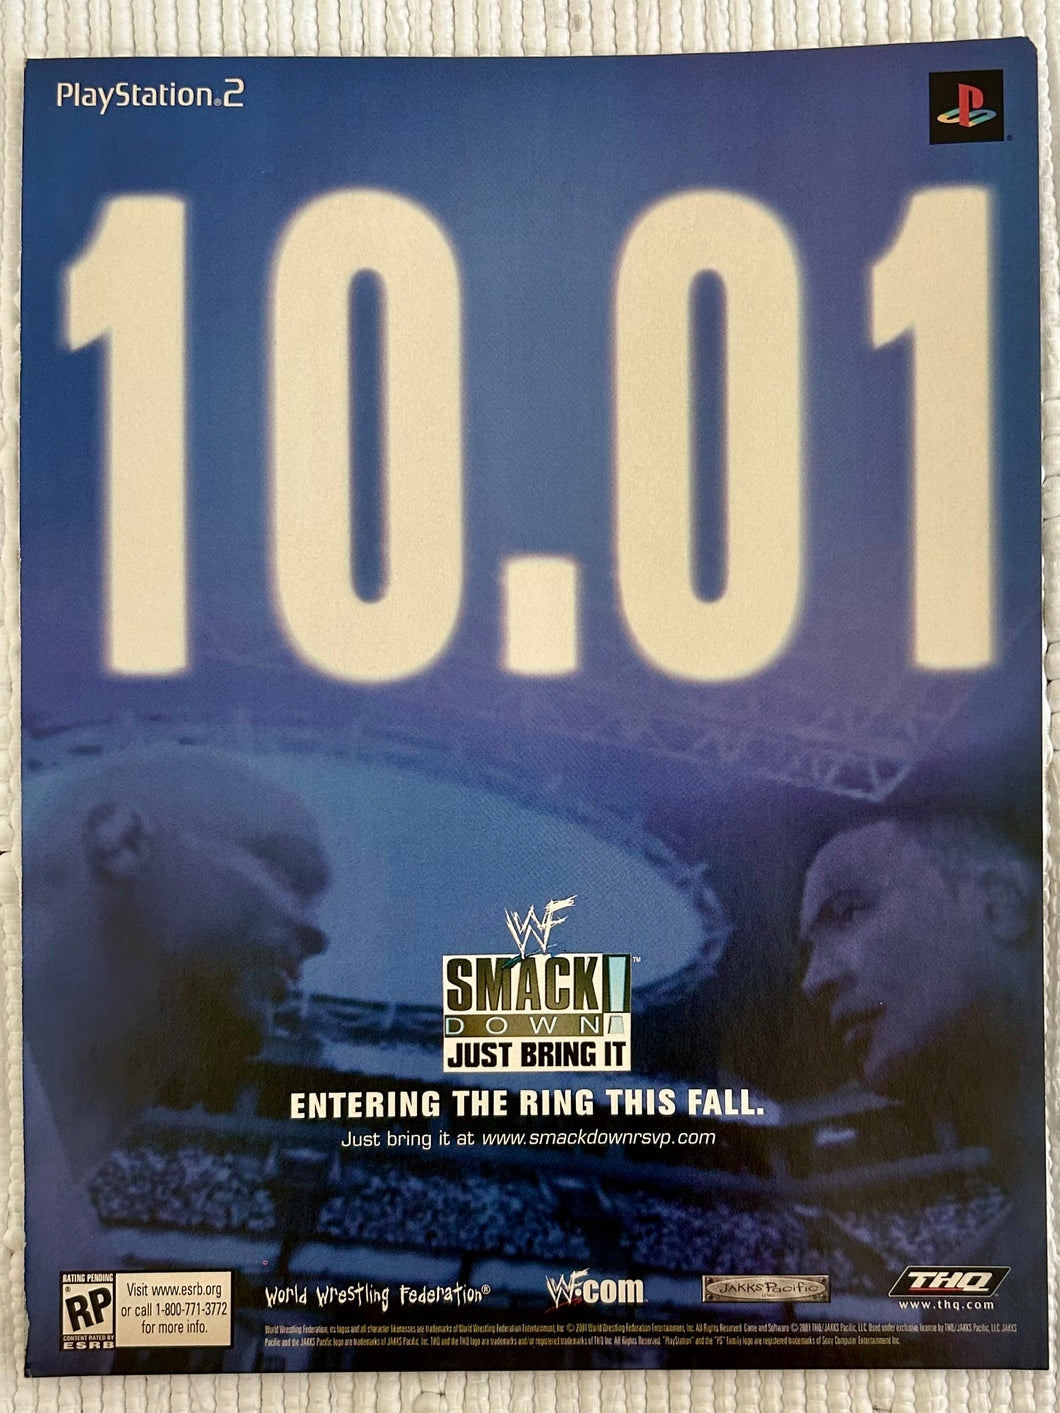 WWF Smackdown! Just Bringing it - PS2 - Original Vintage Advertisement - Print Ads - Laminated A4 Poster